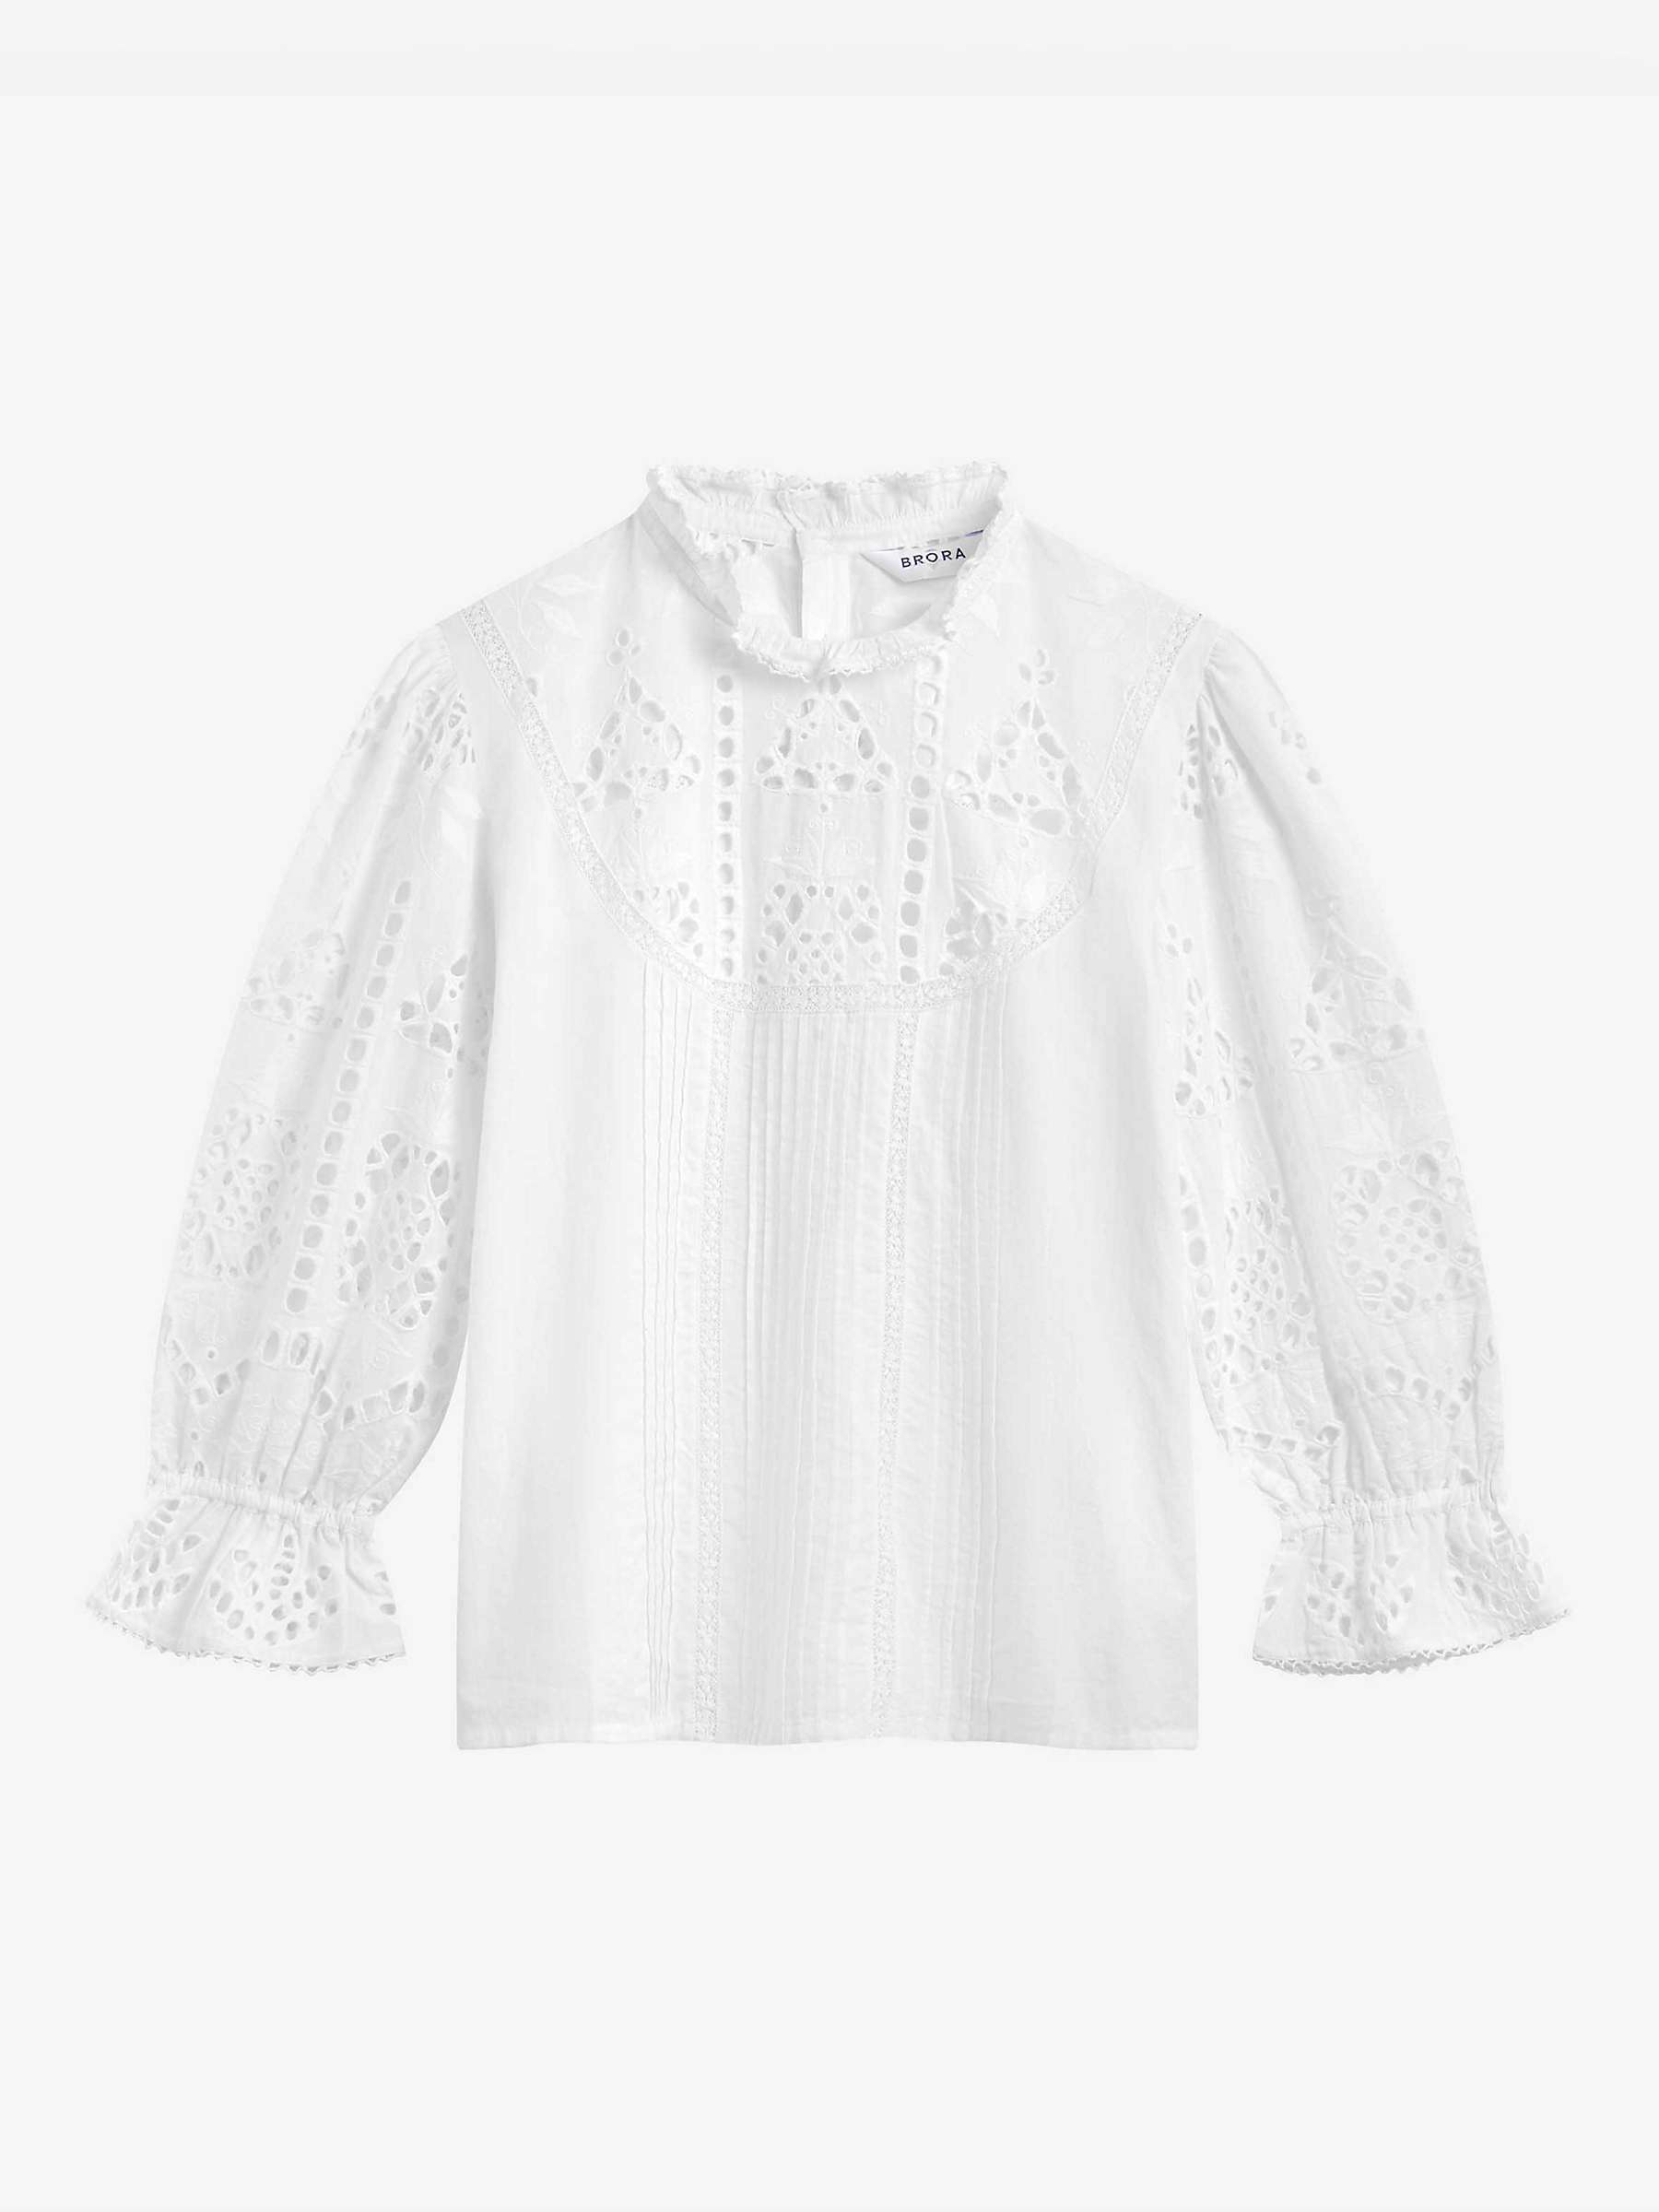 Brora Broderie Anglaise Cotton Blouse, White at John Lewis & Partners